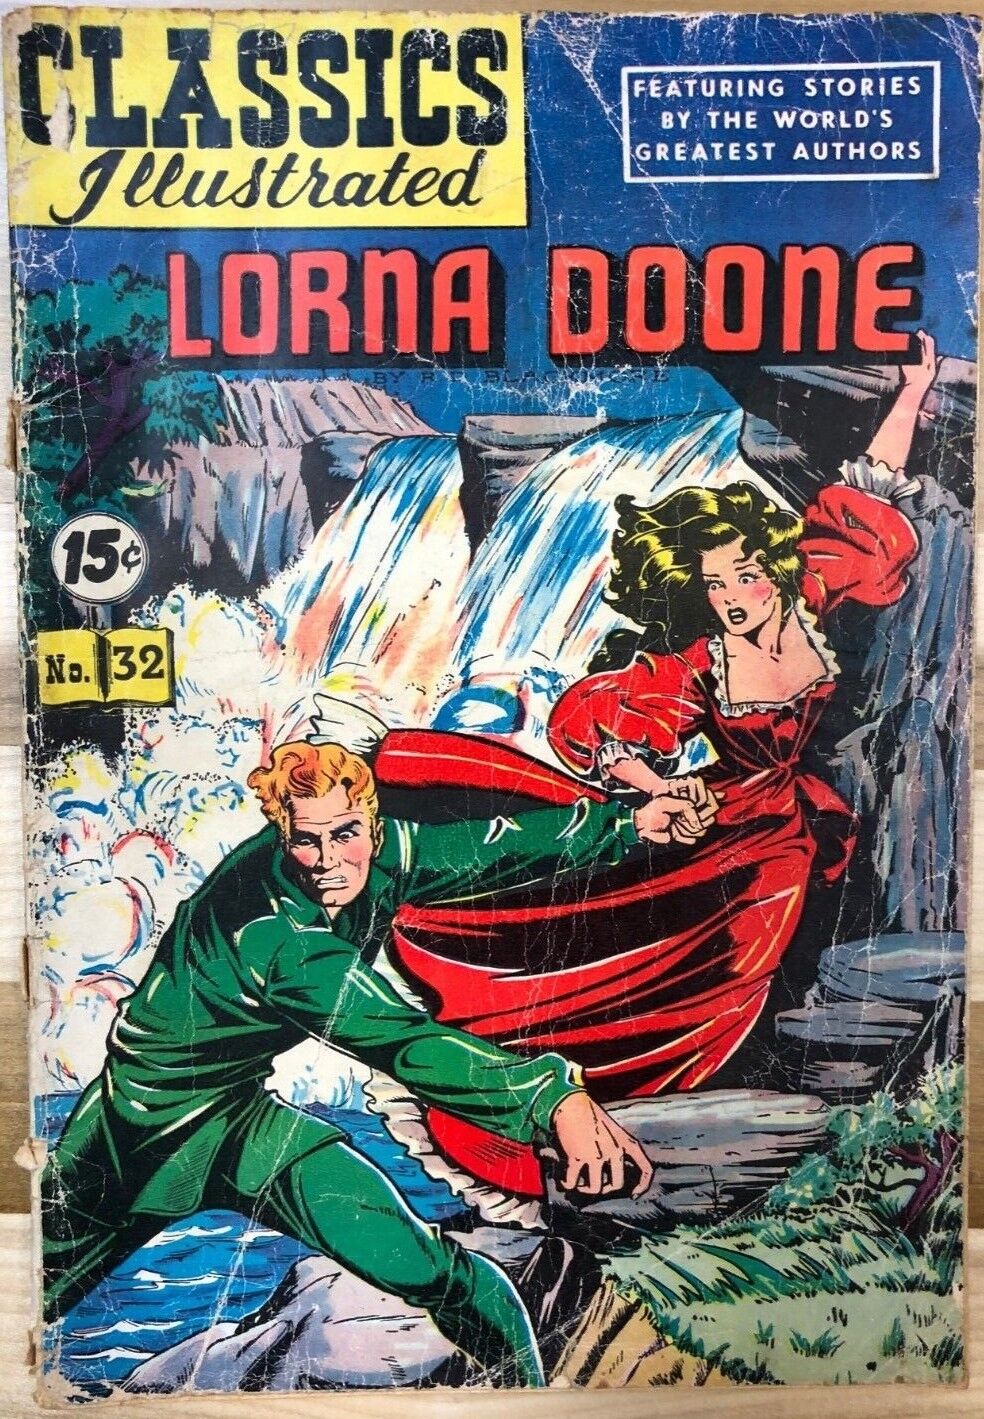 CLASSICS ILLUSTRATED #32 Lorna Doone by R.D. Blackmore (HRN 85) G/VG